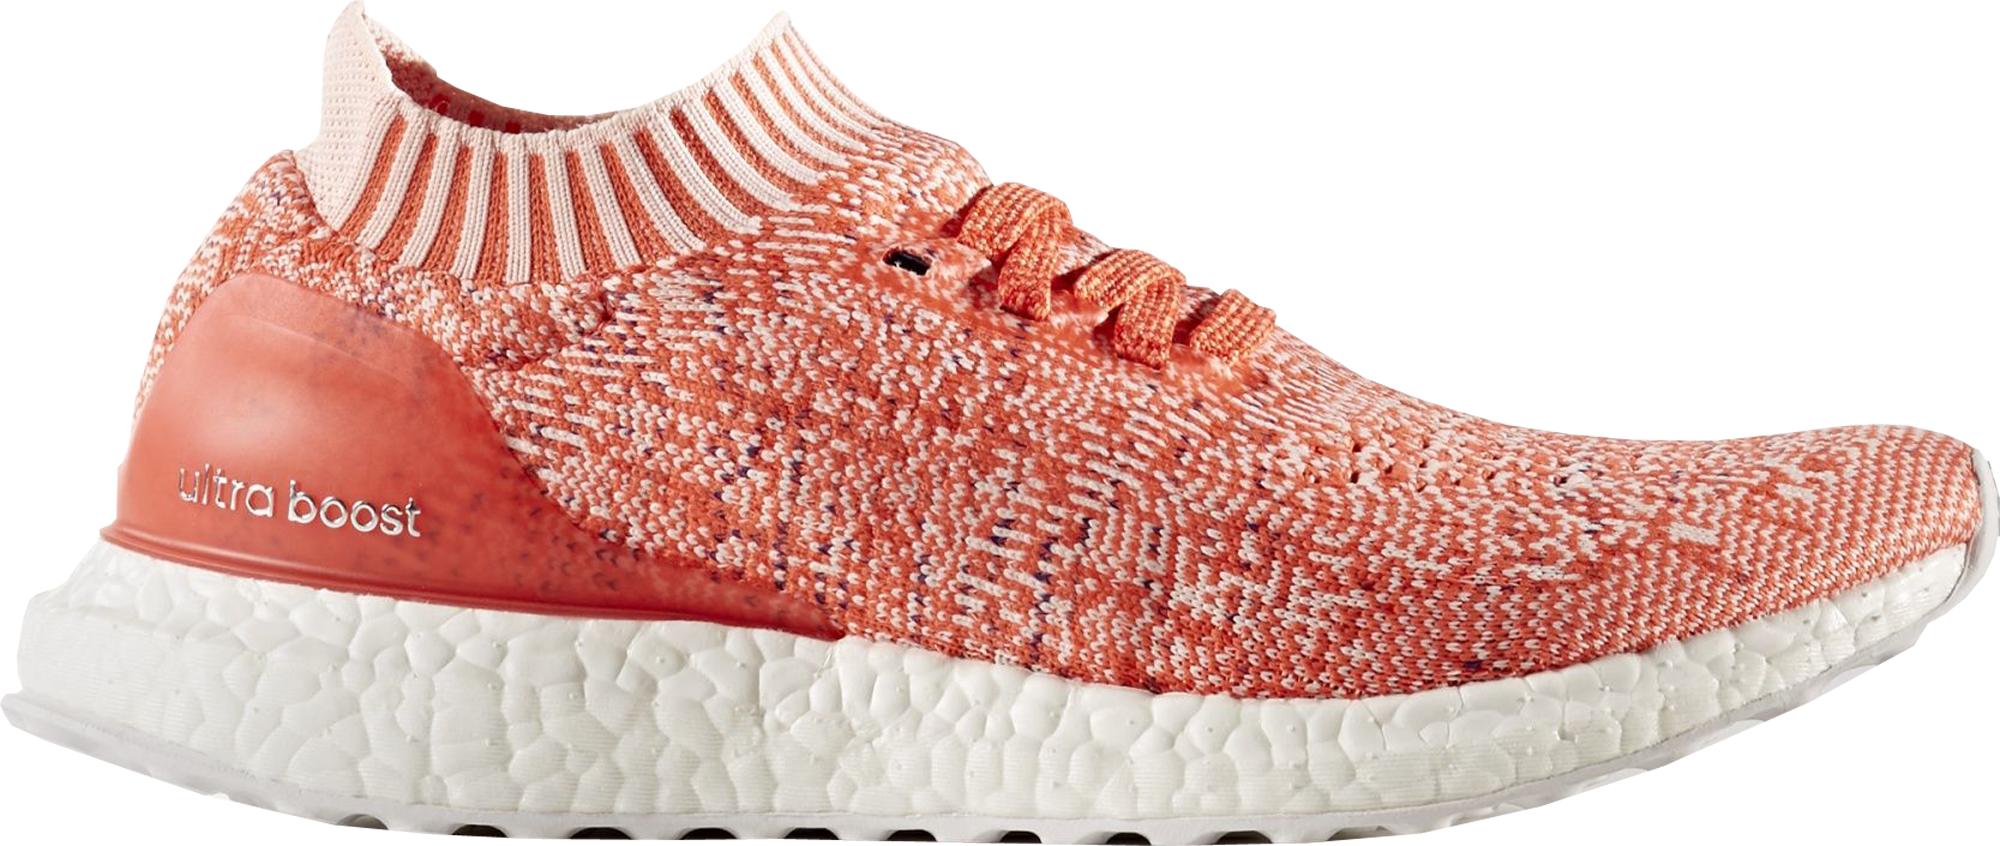 adidas Ultra Boost Uncaged Coral Women's